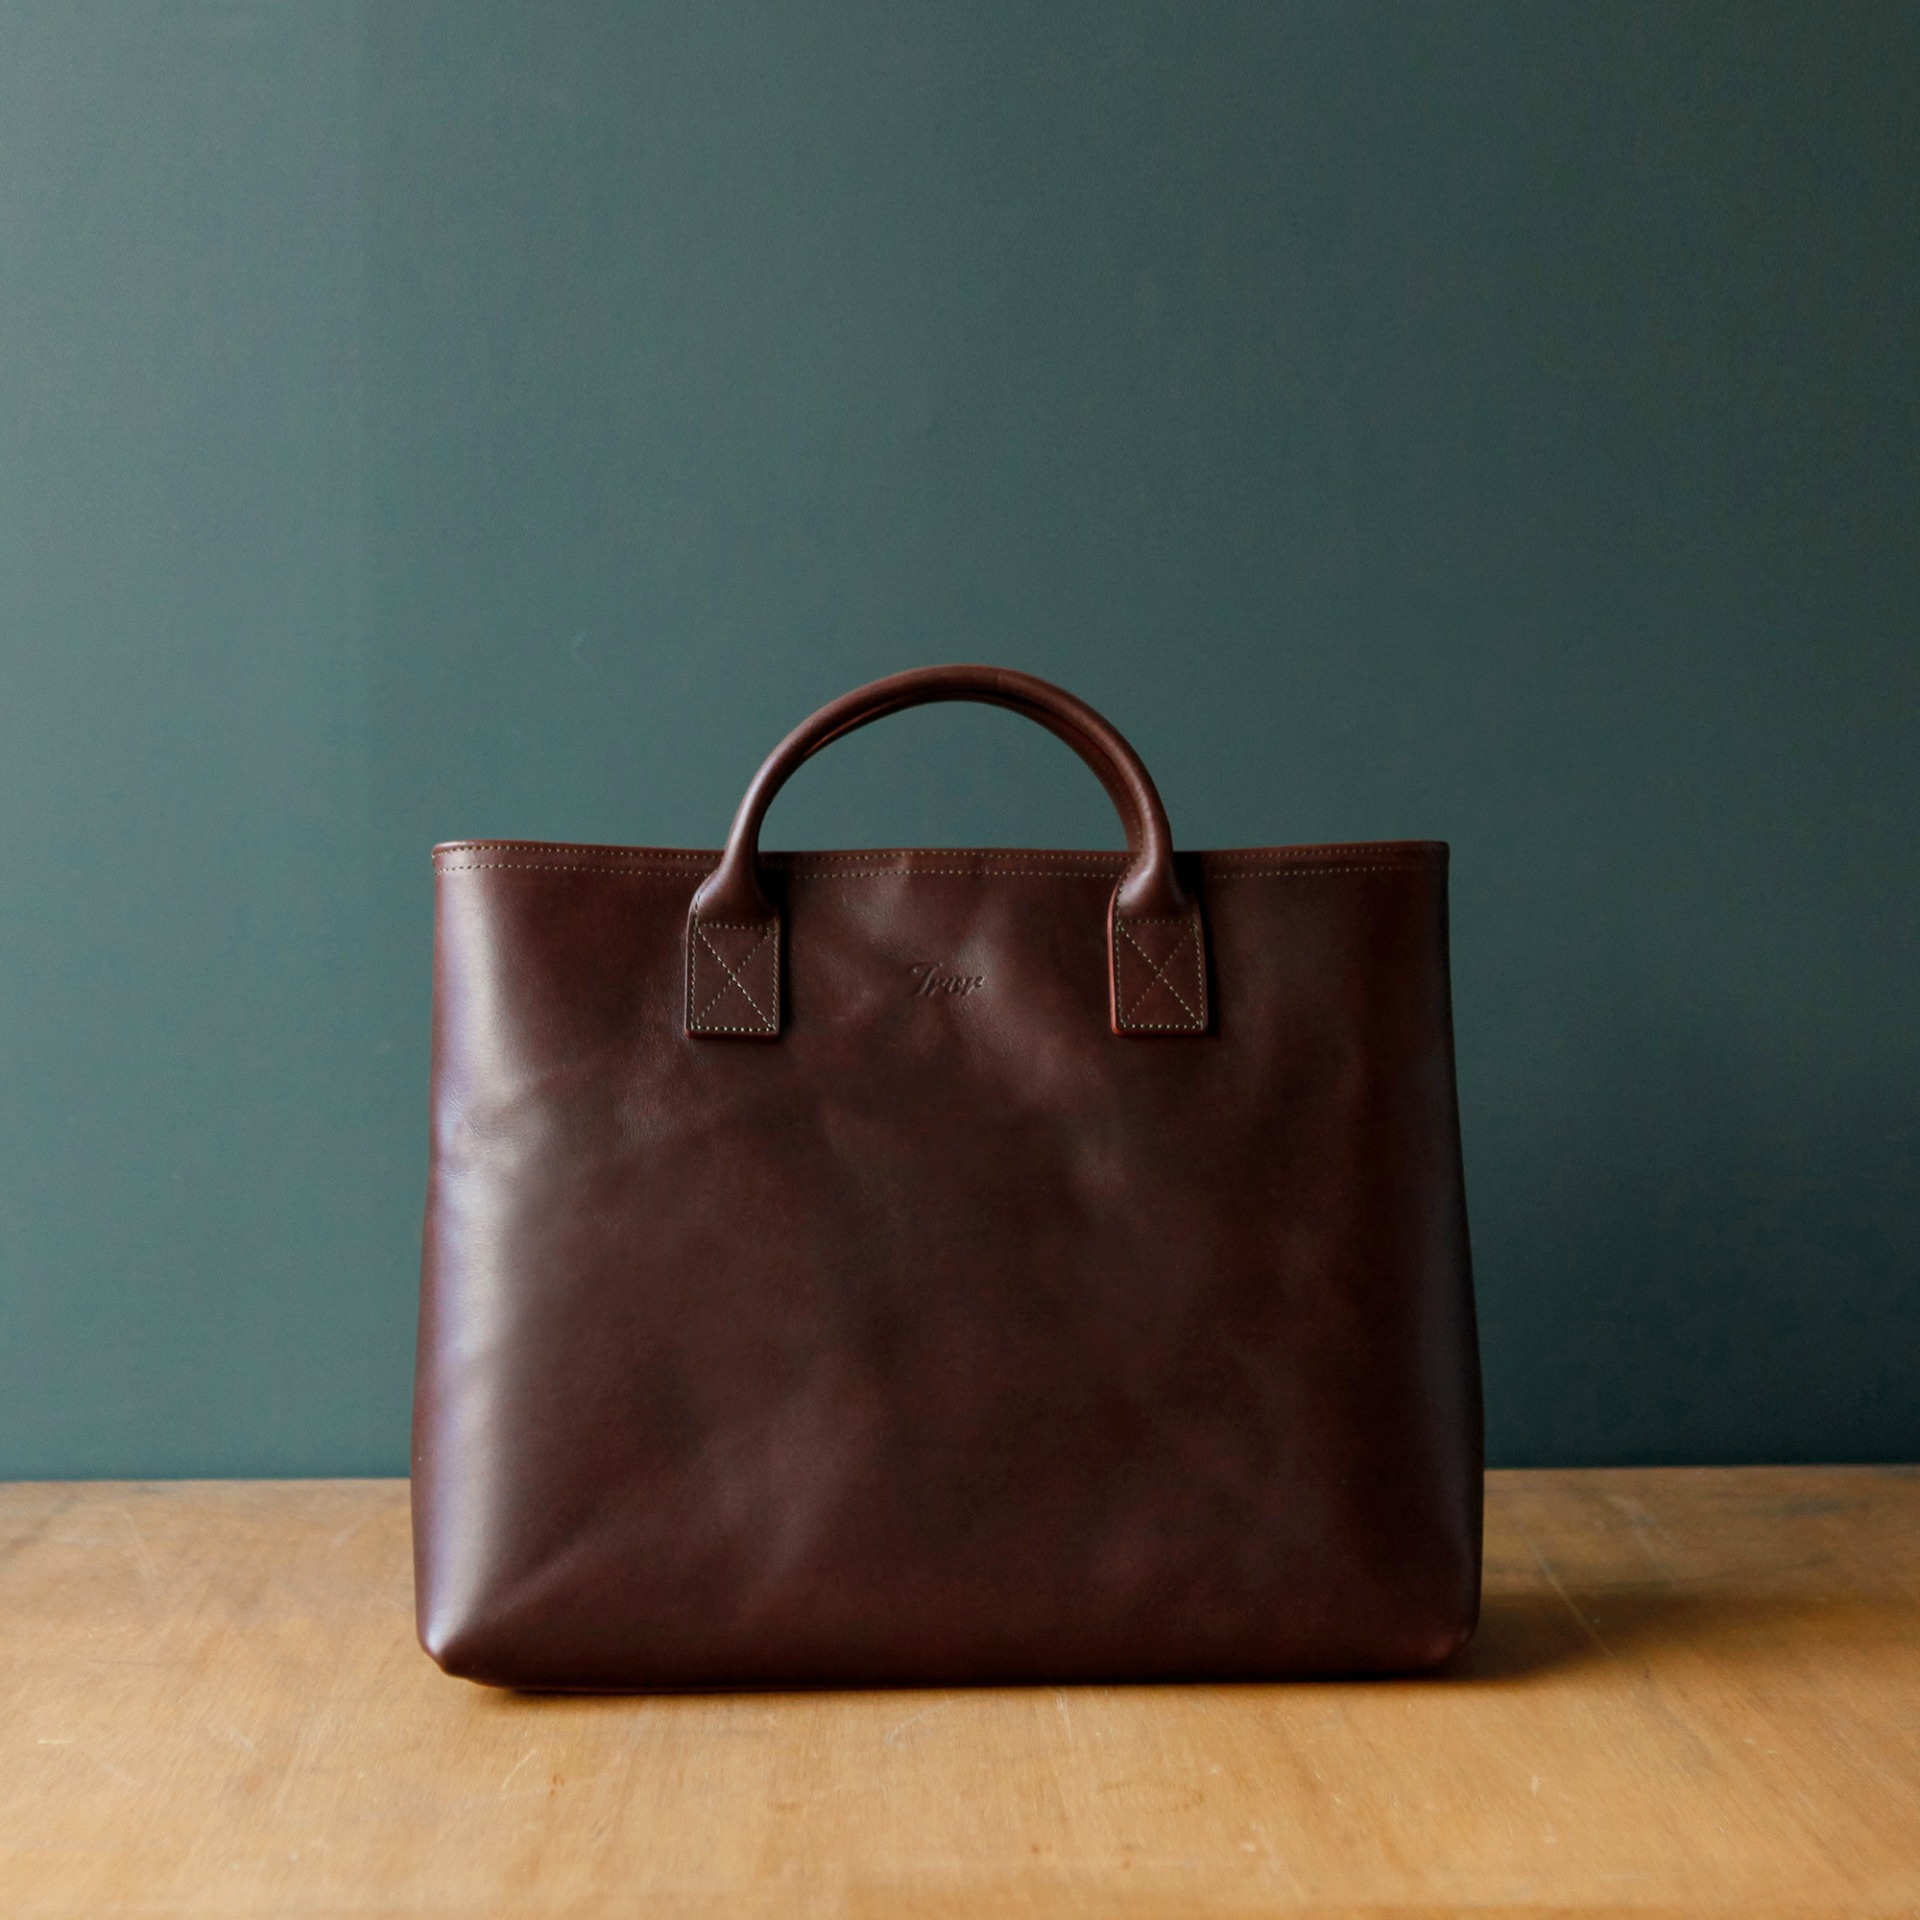 DAY LEATHER TOTE L - SADDLE BROWN